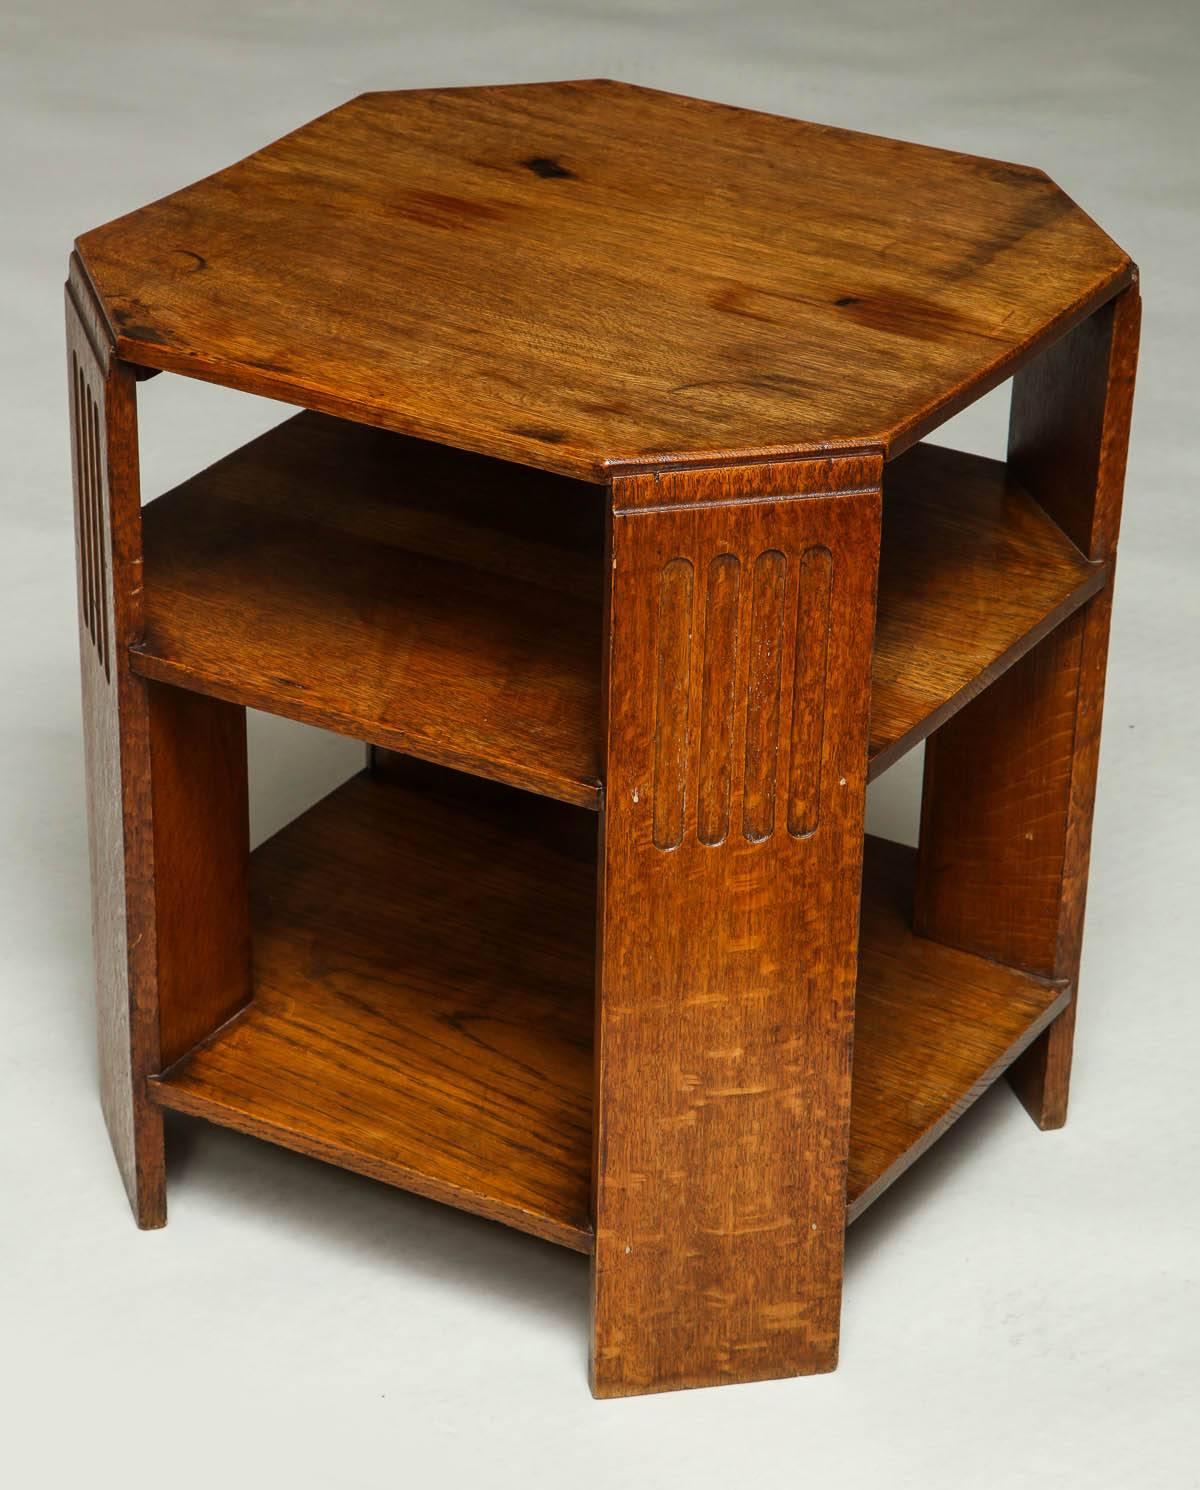 English octagonal side table (cocktail table), possibly by Heal and Co. The chamfered legs with reeded edges and having two useful under tier shelves, 1930s.